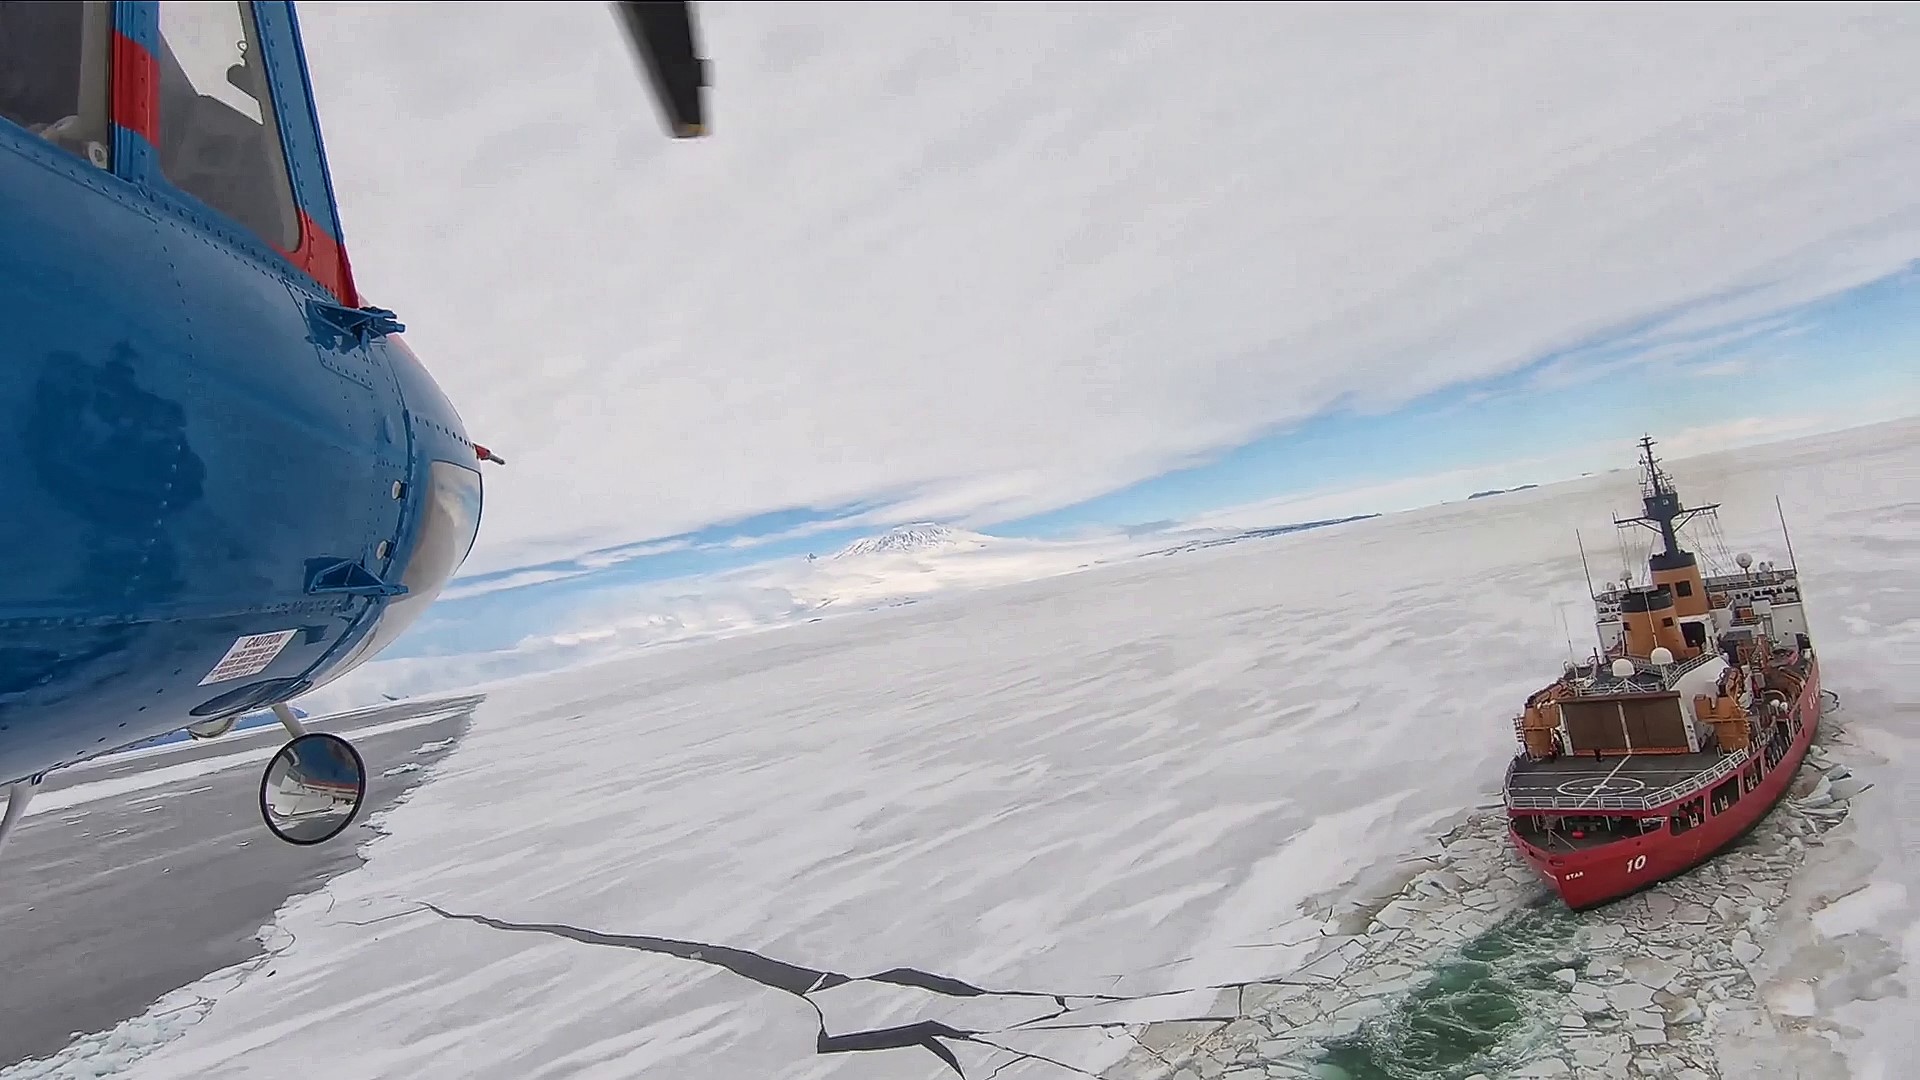 The nose of a helicopter overlooks ship in sea of ice.